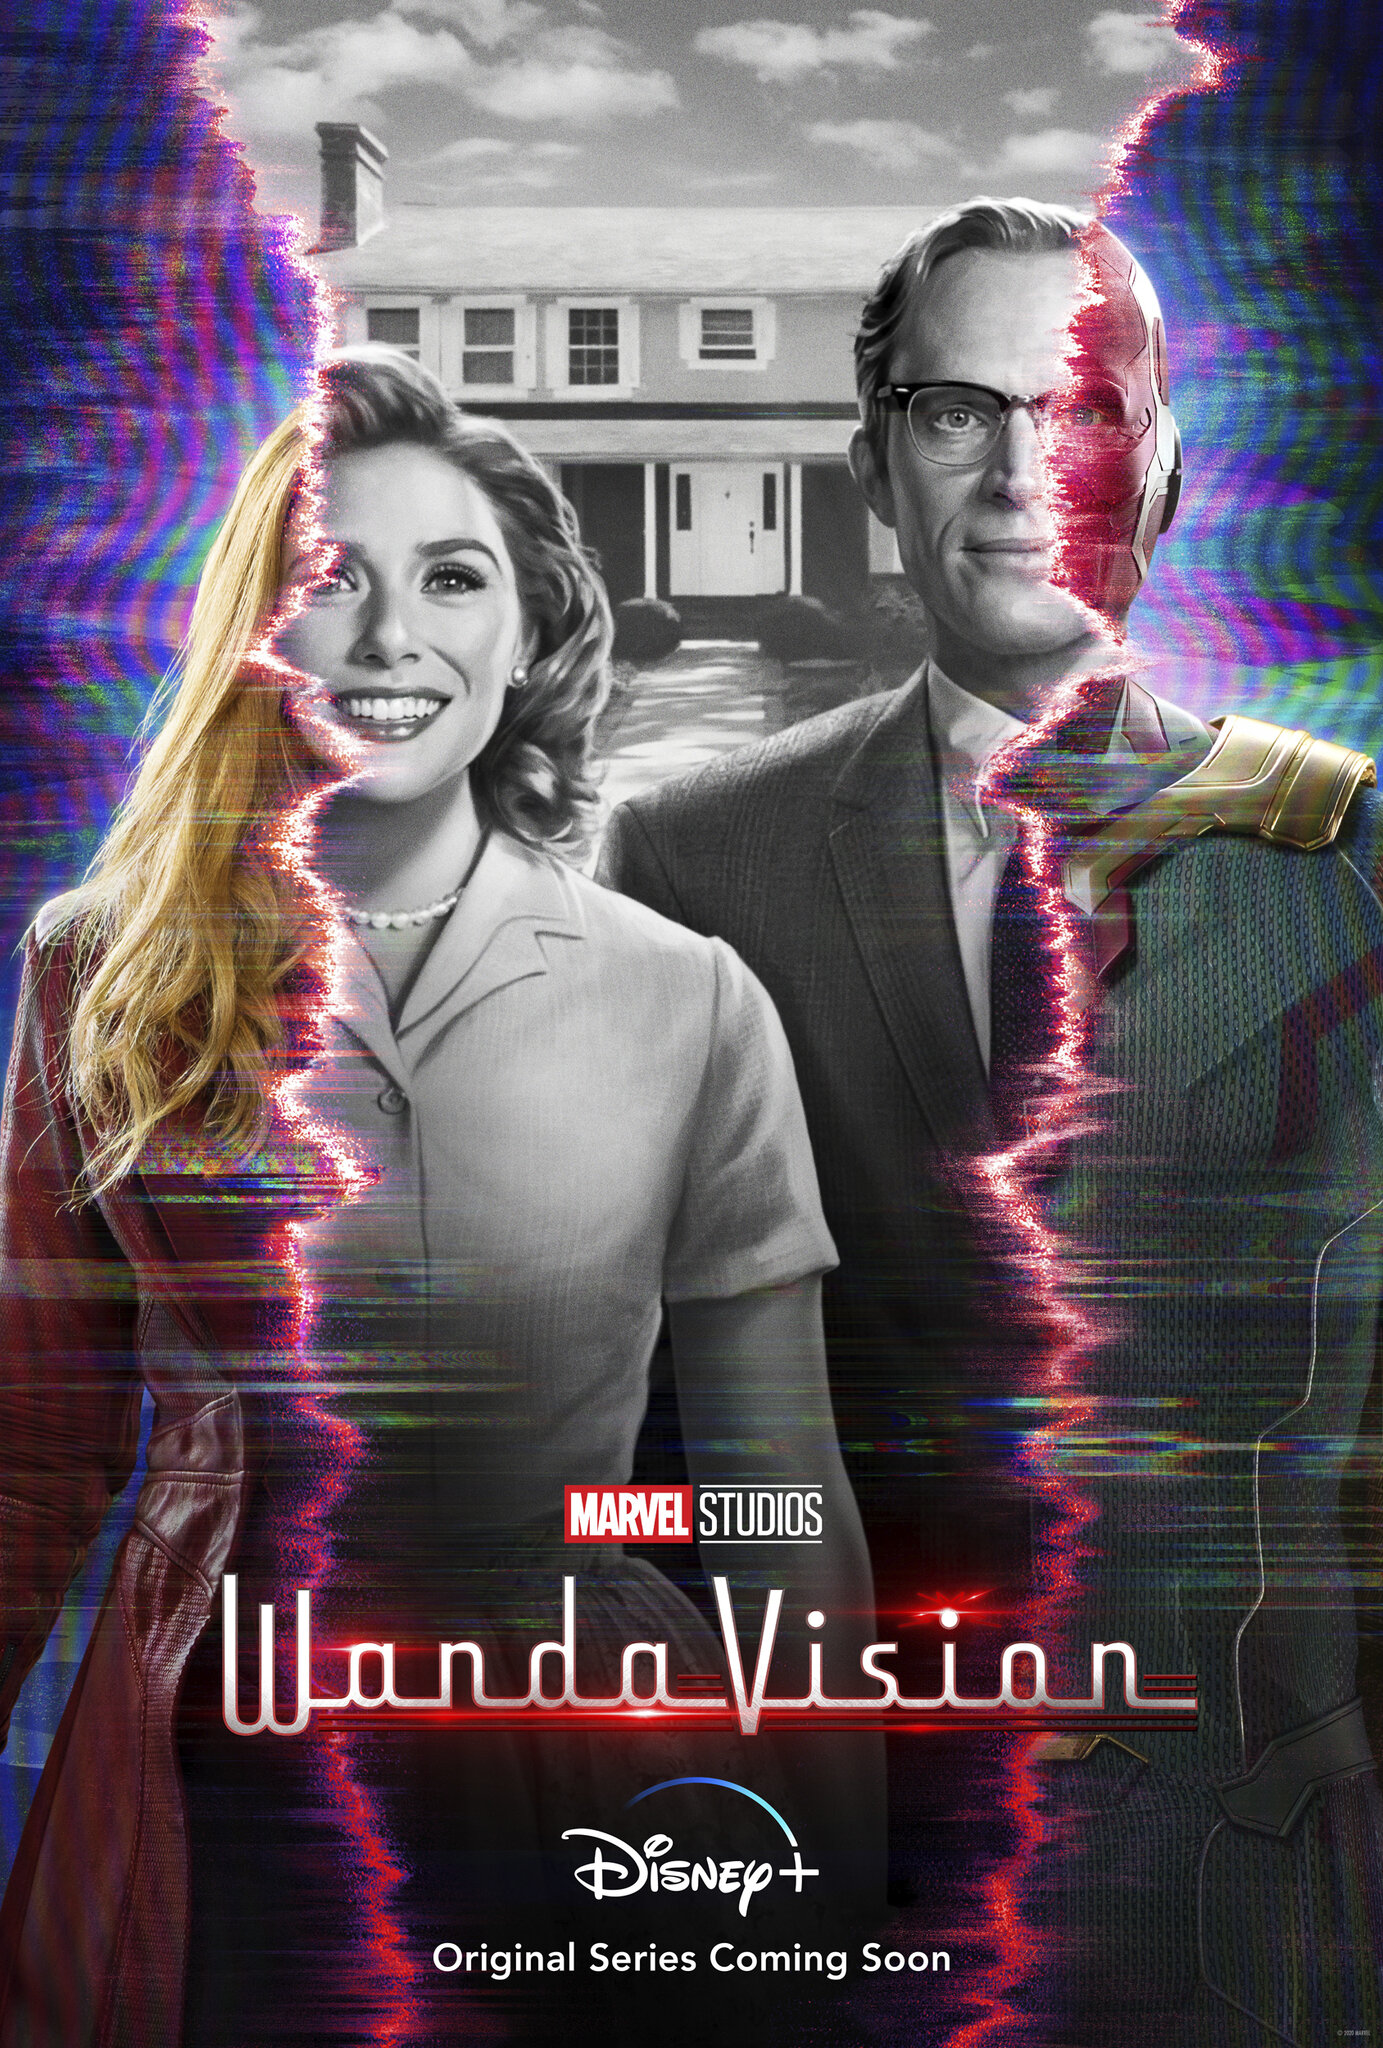 Great First Trailer and Poster For Marvel's WANDAVISION Disney+ Series1